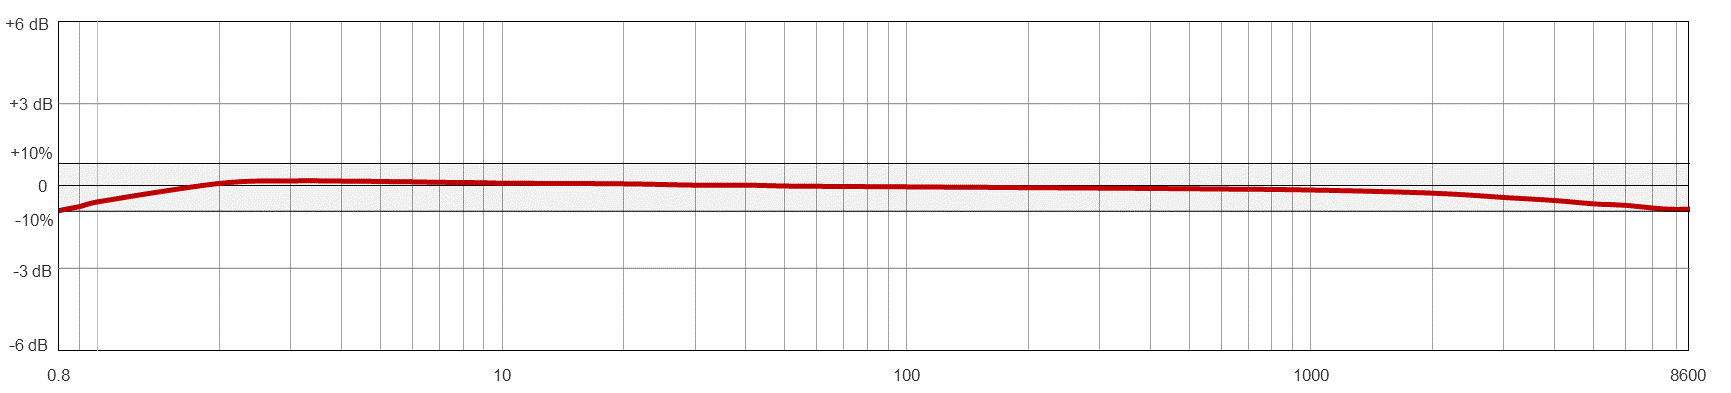 A line graph showing the frequency resopnse of a CTC AC964 condition monitoring sensor.